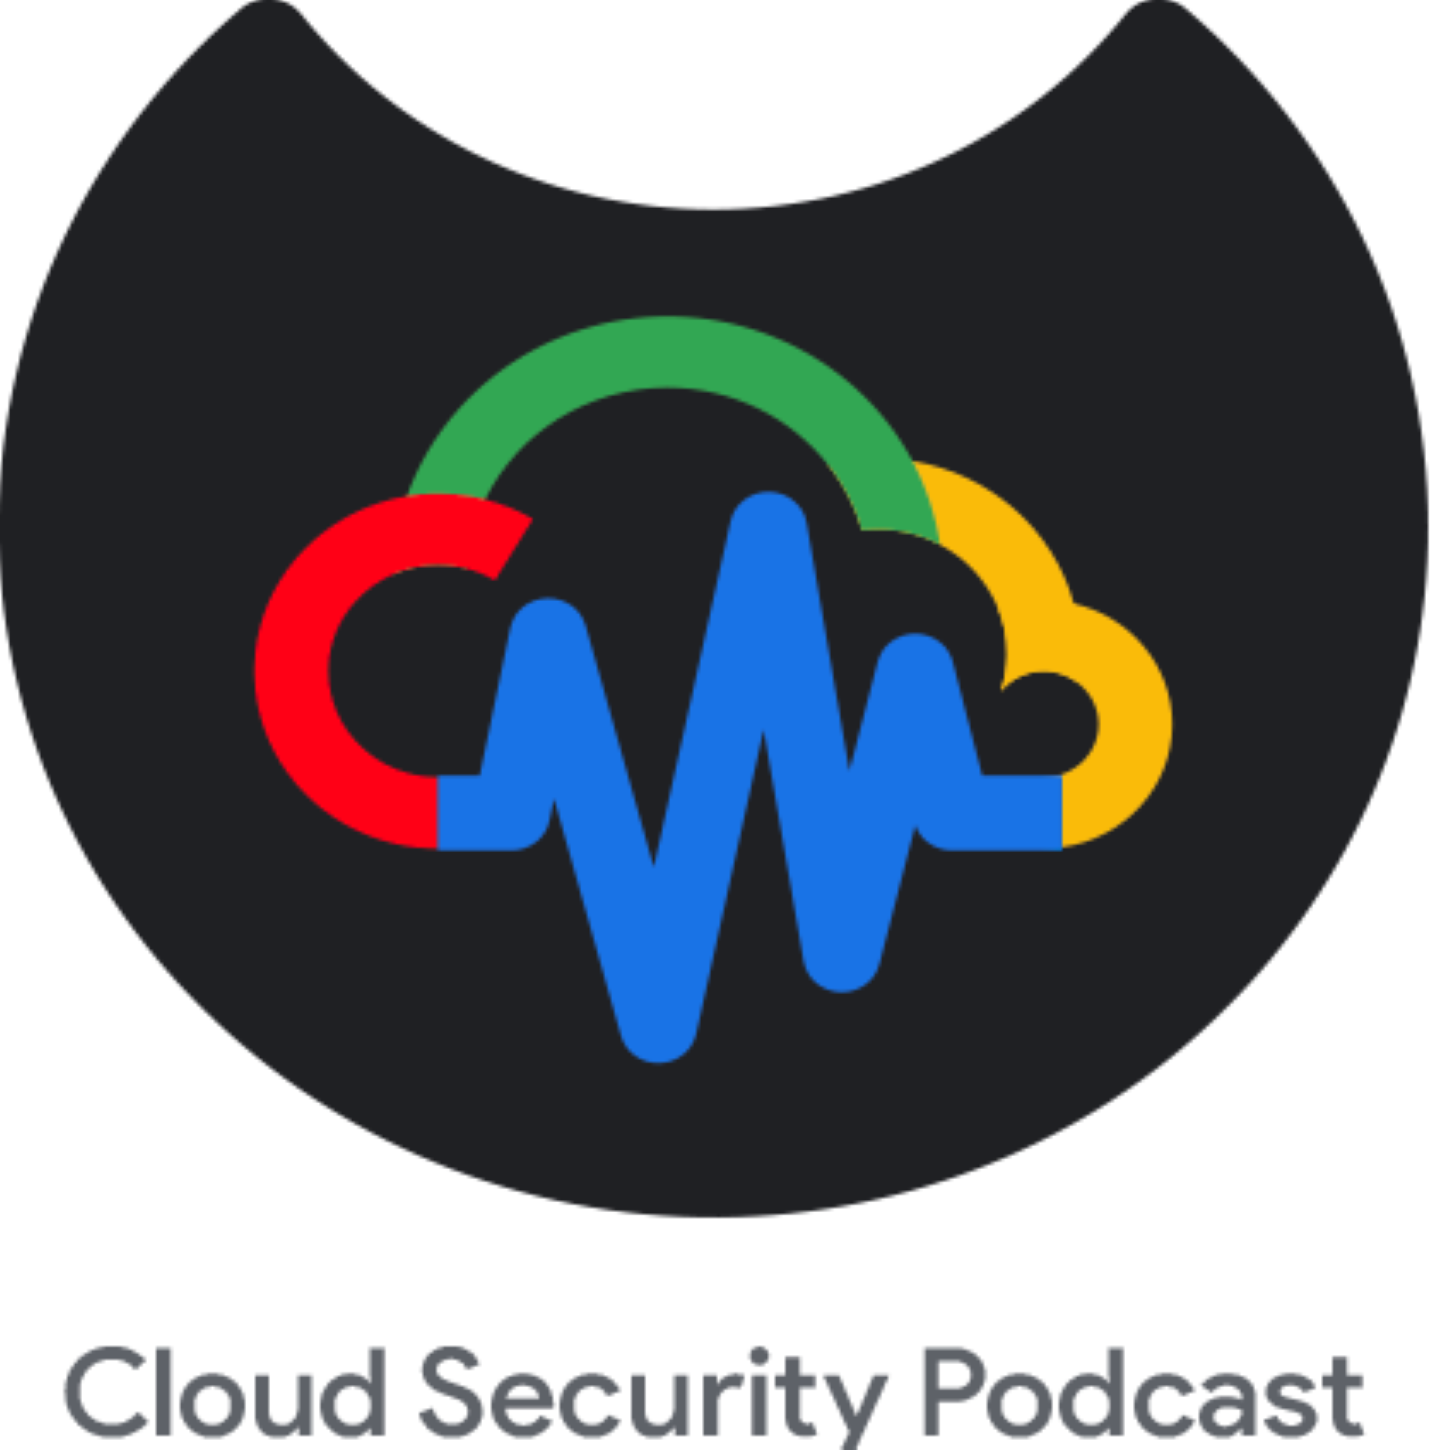 A highlight from EP137 Next 2023 Special: Conference Recap - AI, Cloud, Security, Magical Hallway Conversations